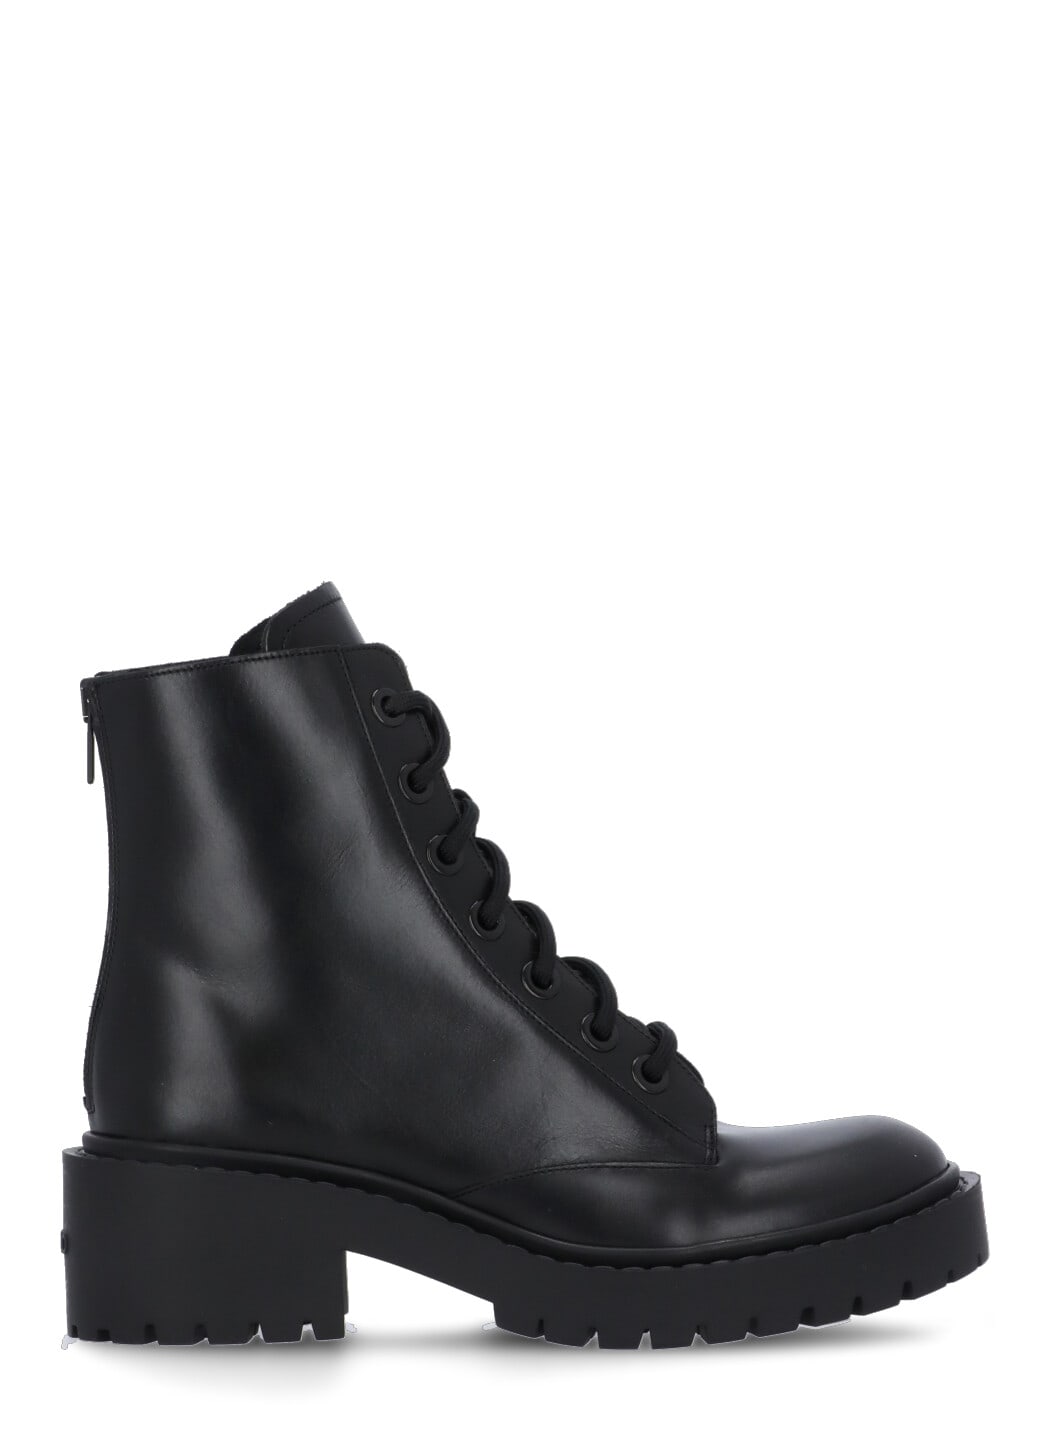 Buy Kenzo Pike Ankle Boot online, shop Kenzo shoes with free shipping